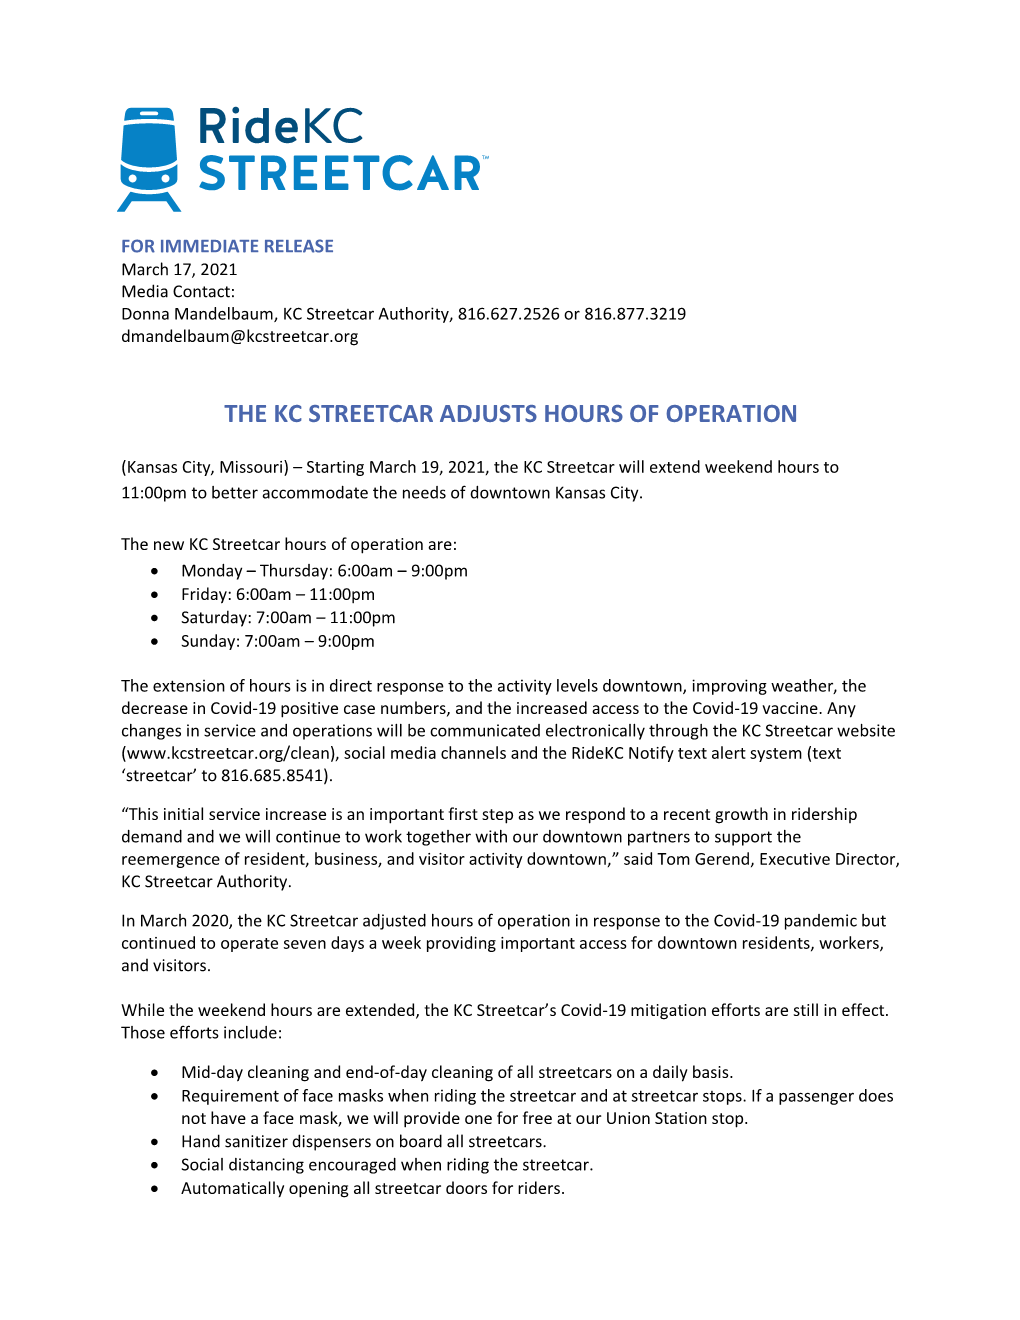 The Kc Streetcar Adjusts Hours of Operation